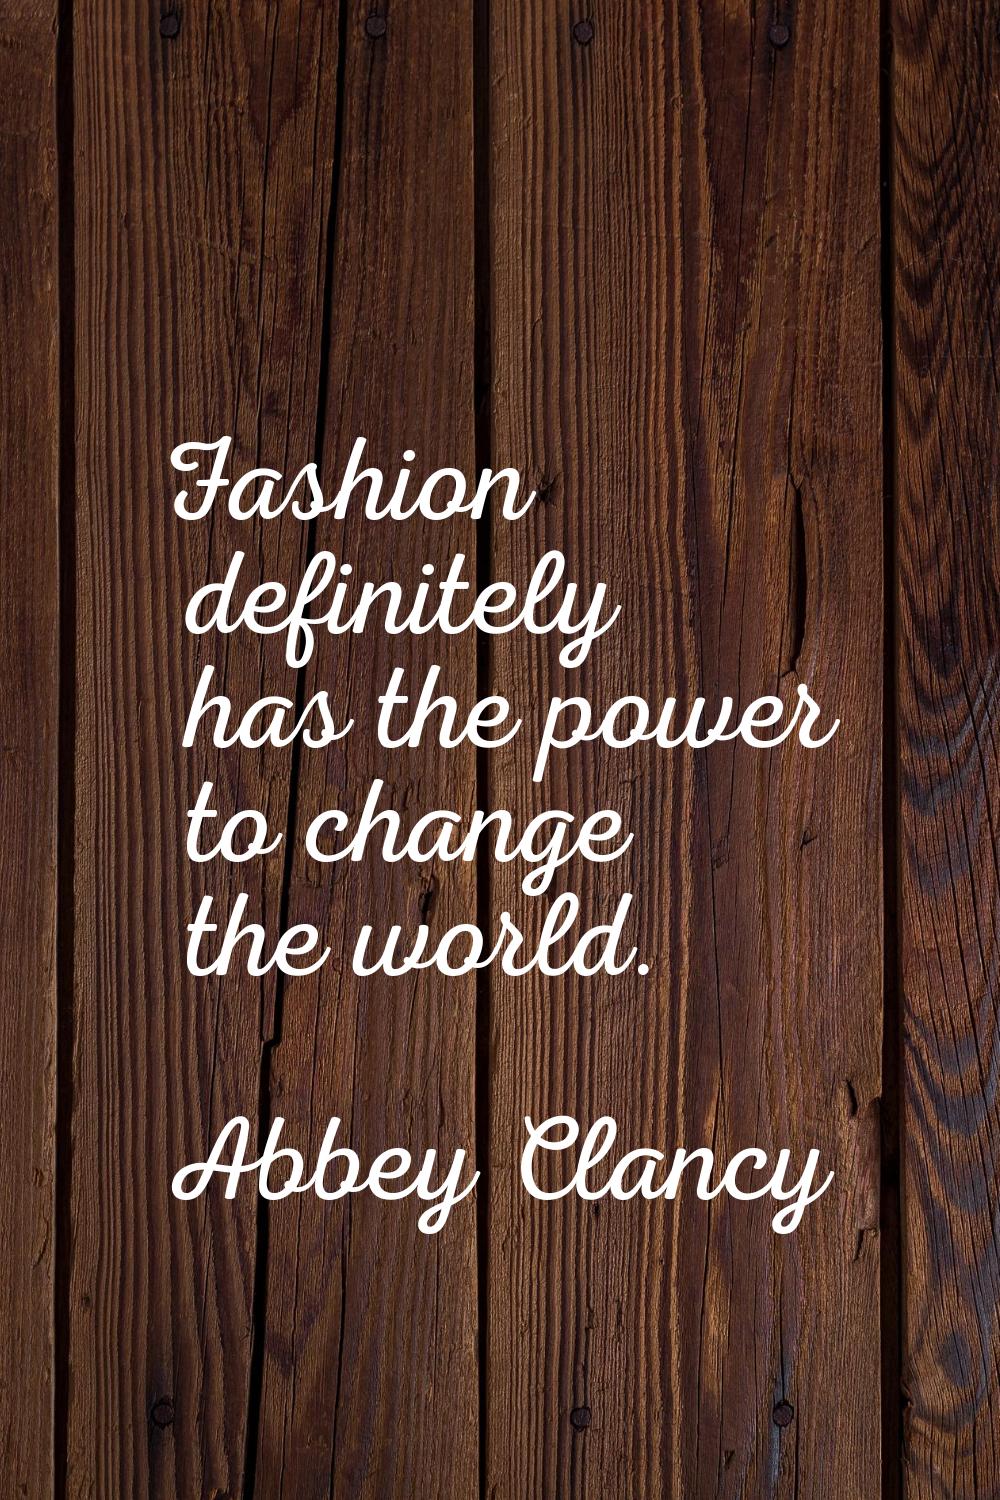 Fashion definitely has the power to change the world.